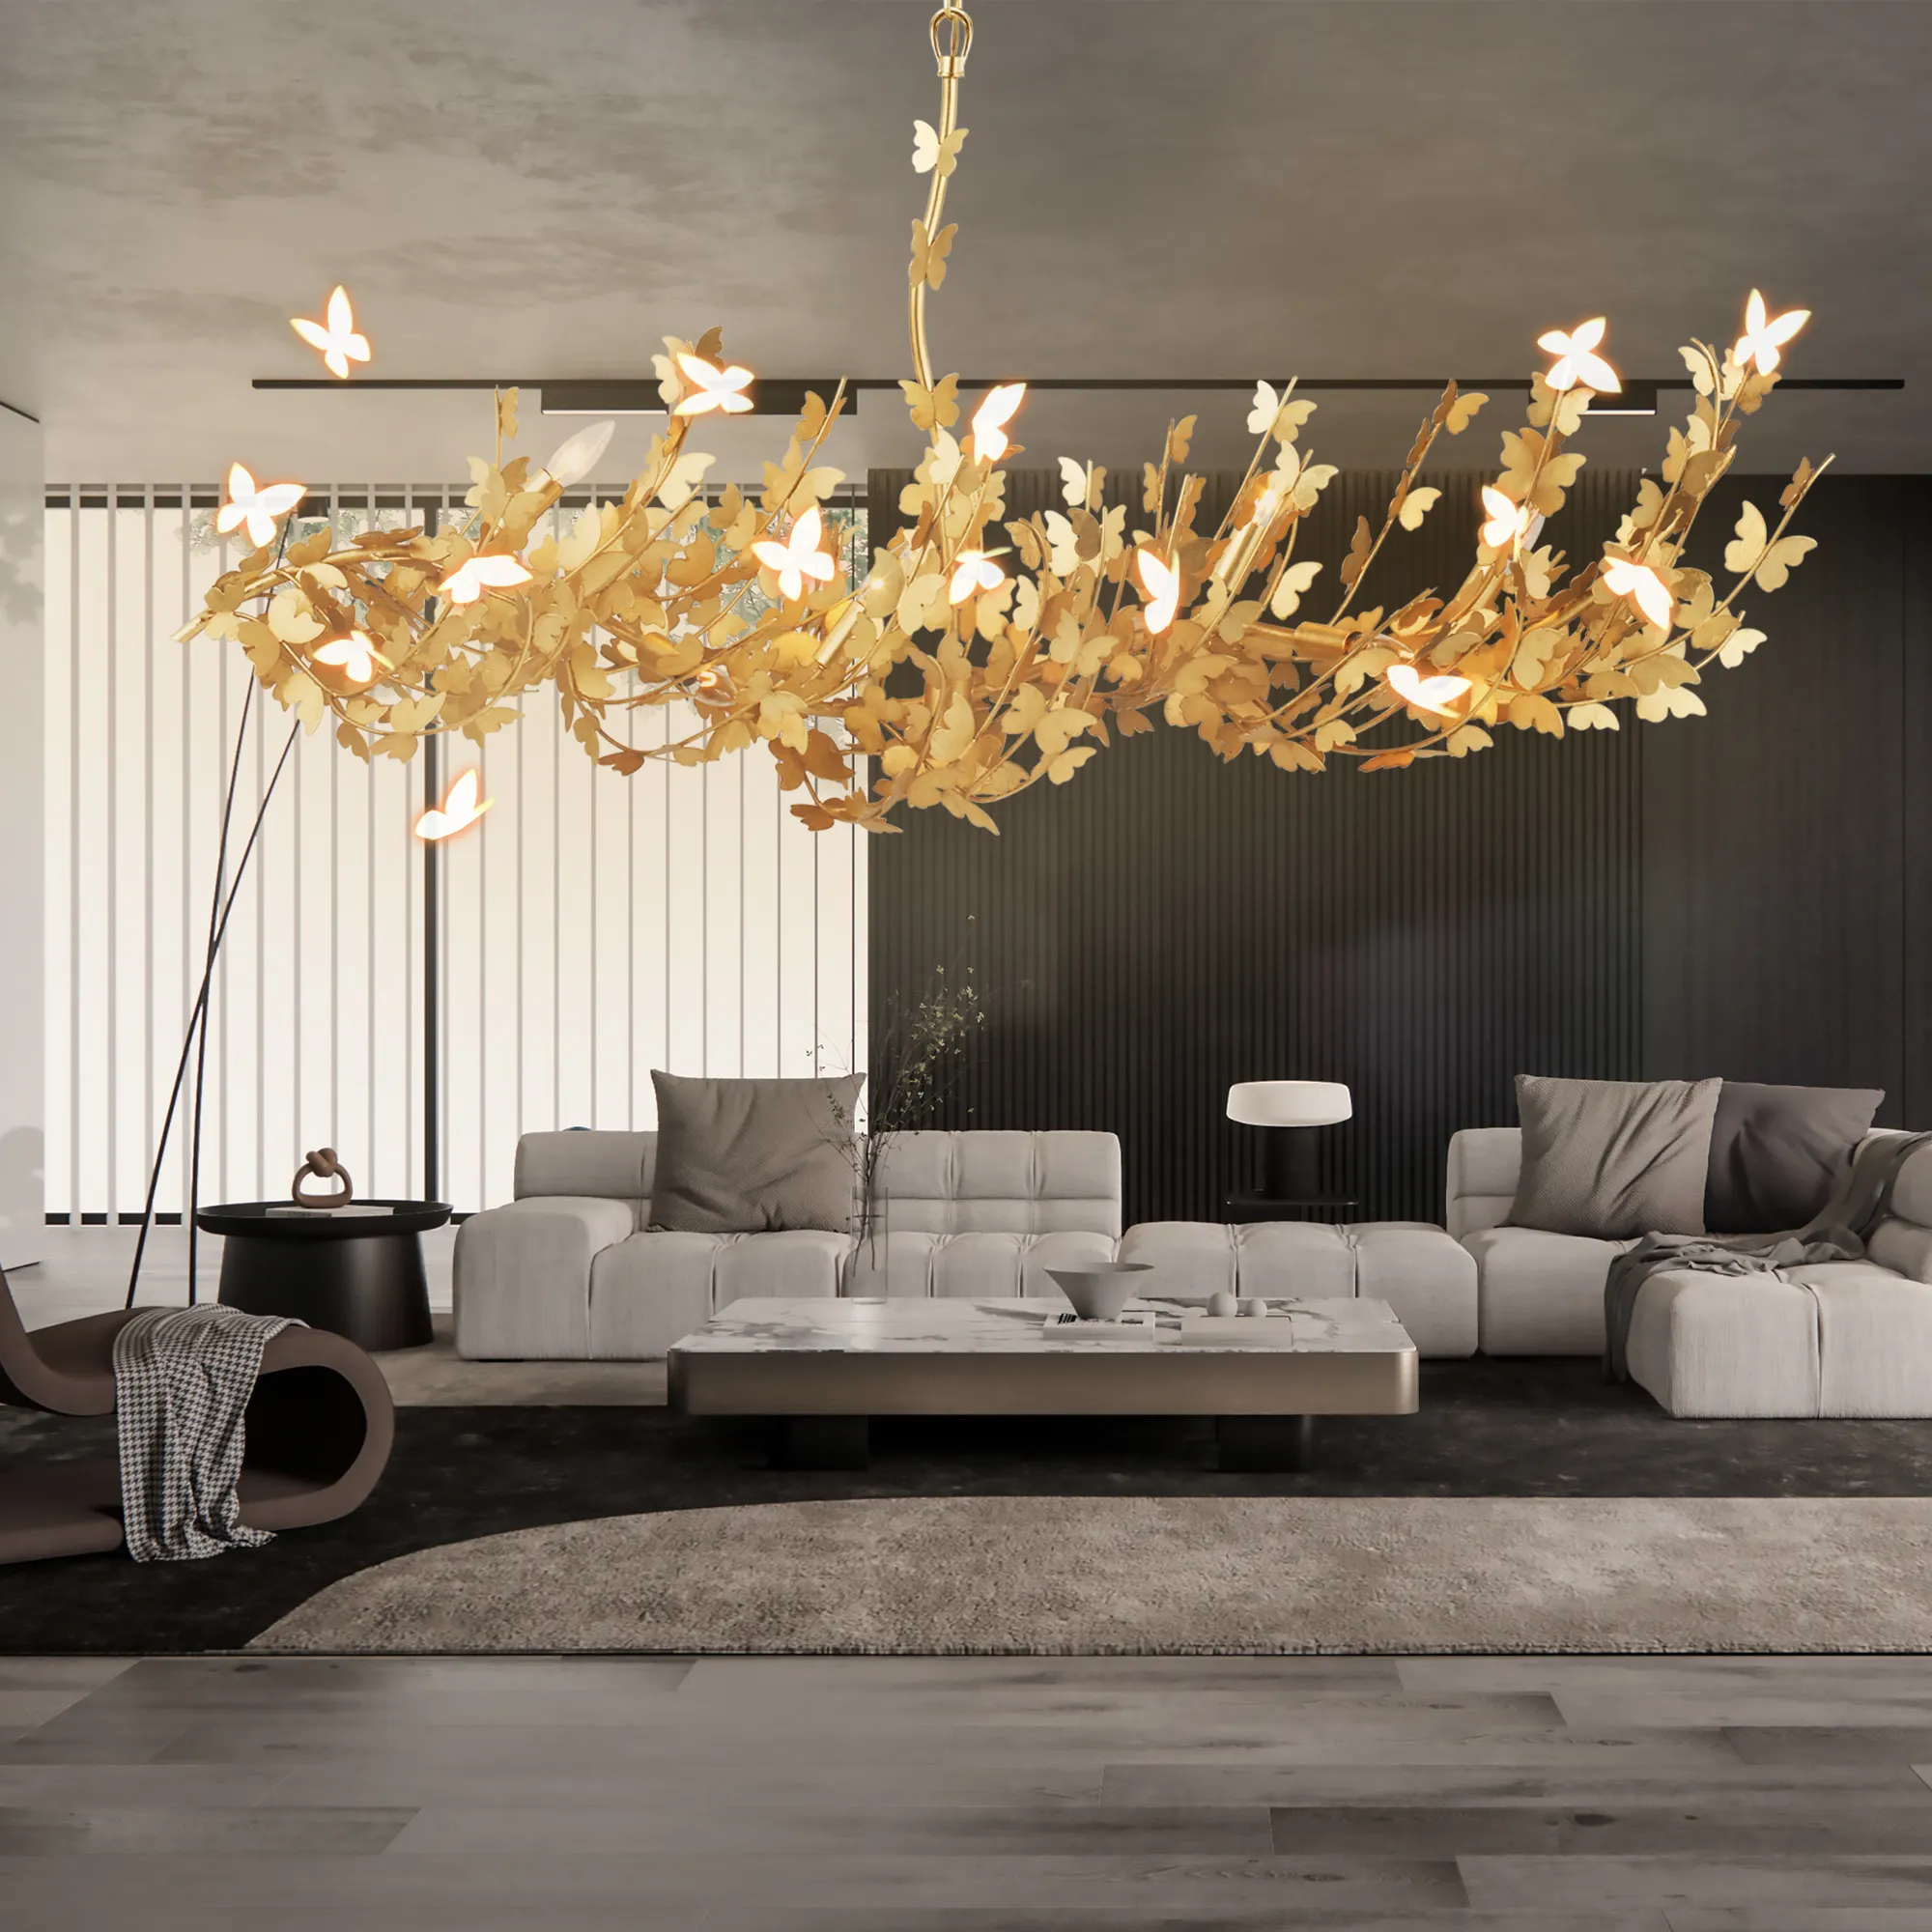 Modern Gold Butterfly Weddings Led Ceiling Moder Contemporary Entryway High Ceiling Hanging Pendant Light E27 Chandelier